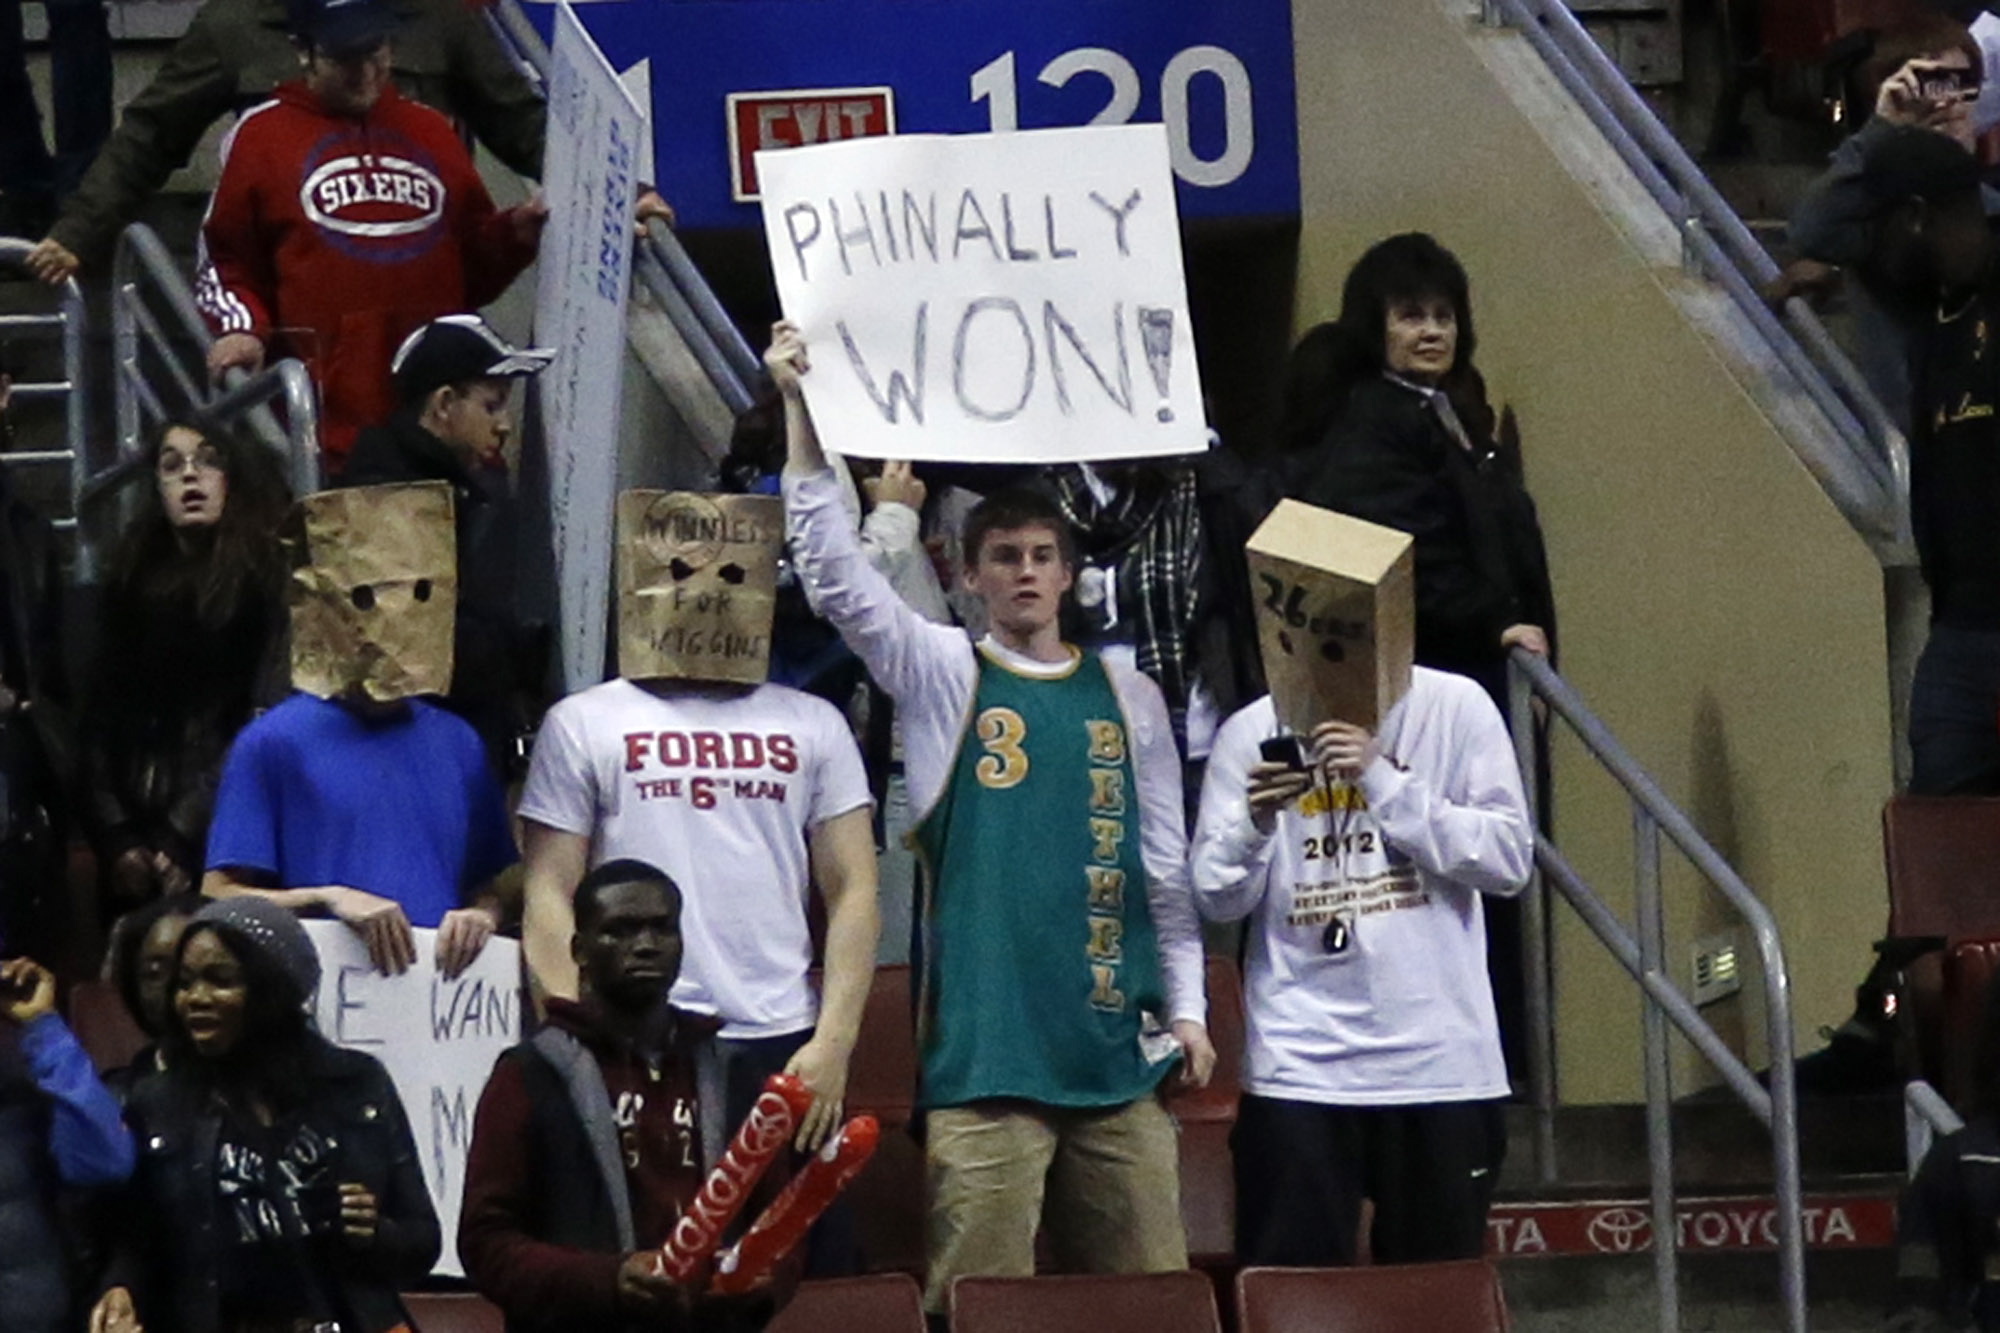 Fans hold signs after the Philadelphia 76ers won an NBA basketball game against the Detroit Pistons, Saturday, March 29, 2014, in Philadelphia. Philadelphia won 123-98, breaking a 26-game losing streak.